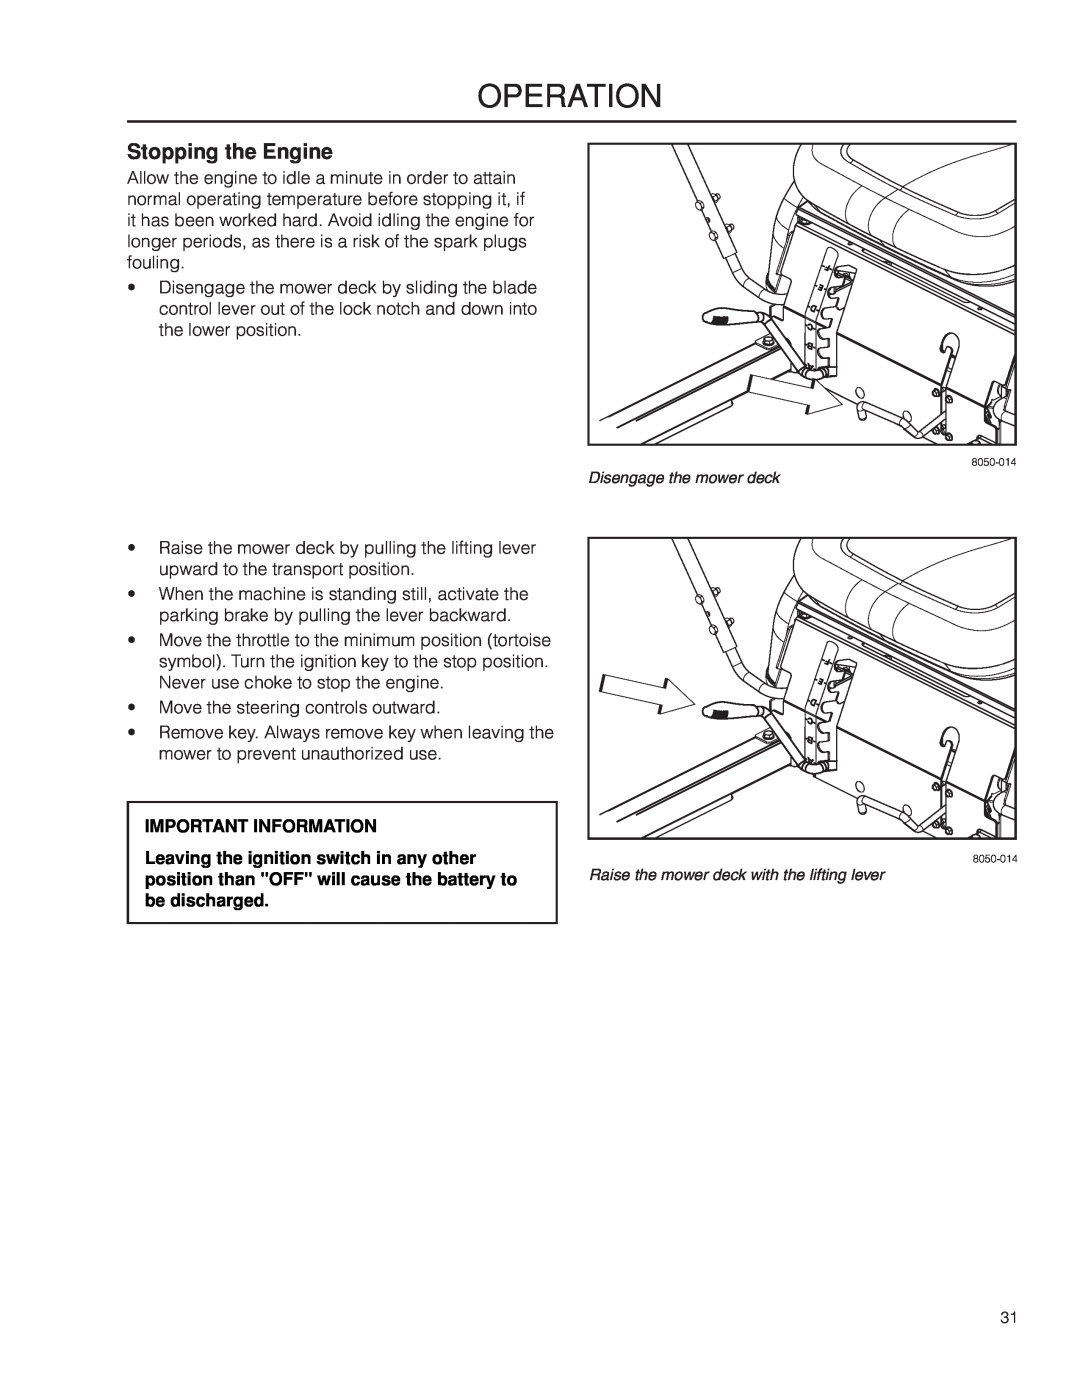 Dixon 966064401, SPDZTR 30 BF, 966043101 manual Stopping the Engine, operation, Important Information 